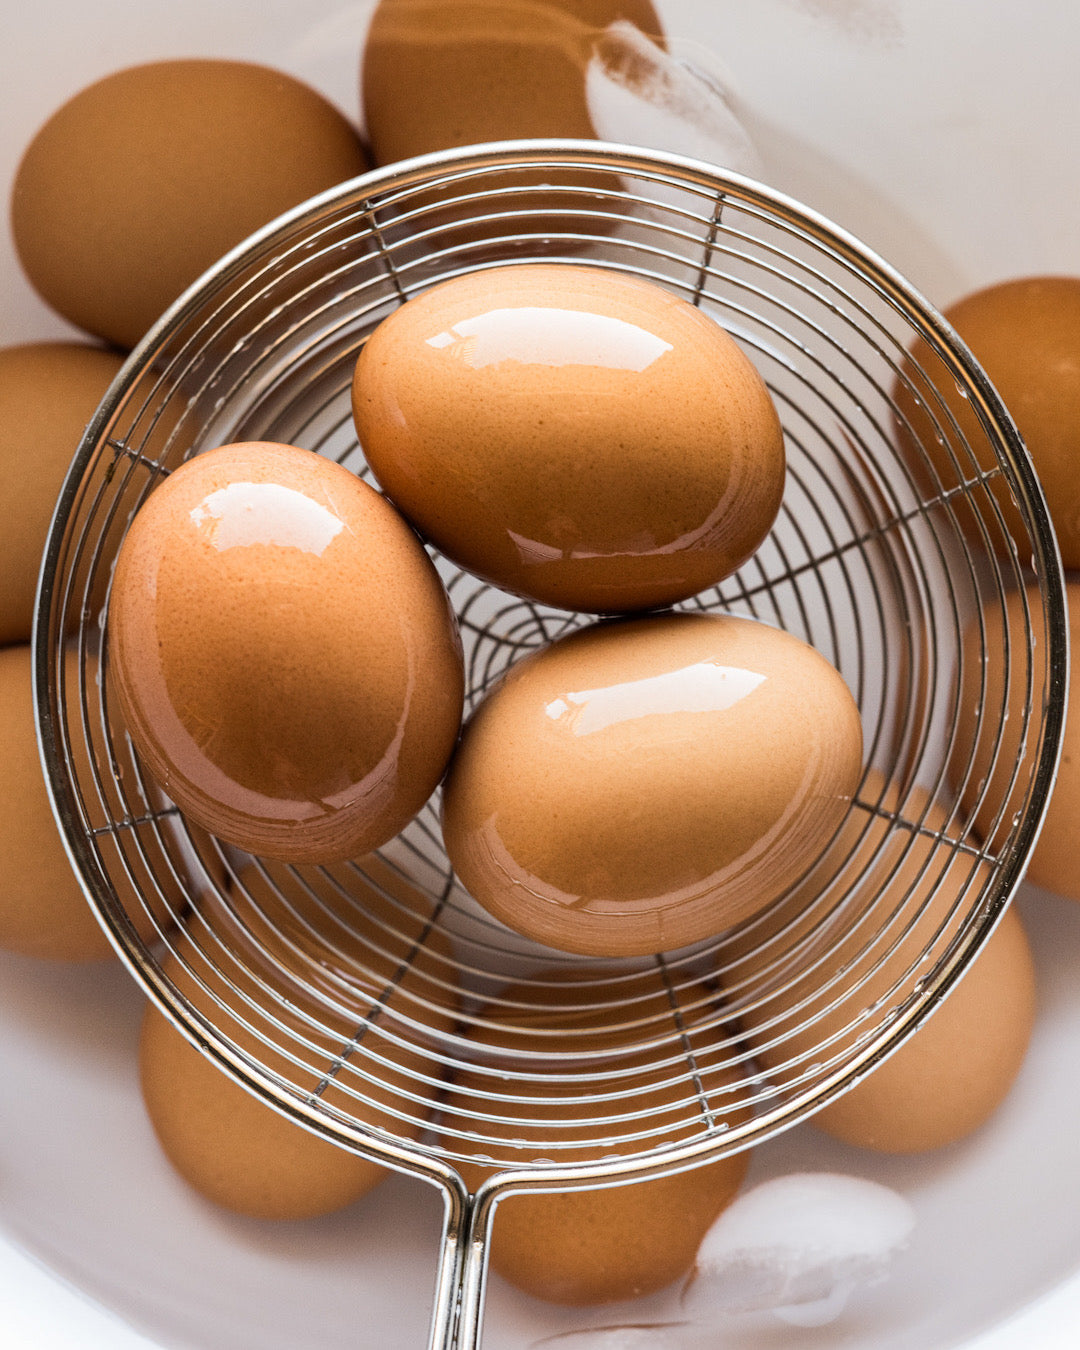 A metal strainer lifts perfectly-cooked hard-boiled eggs out of an ice water bath. | peteandgerrys.com